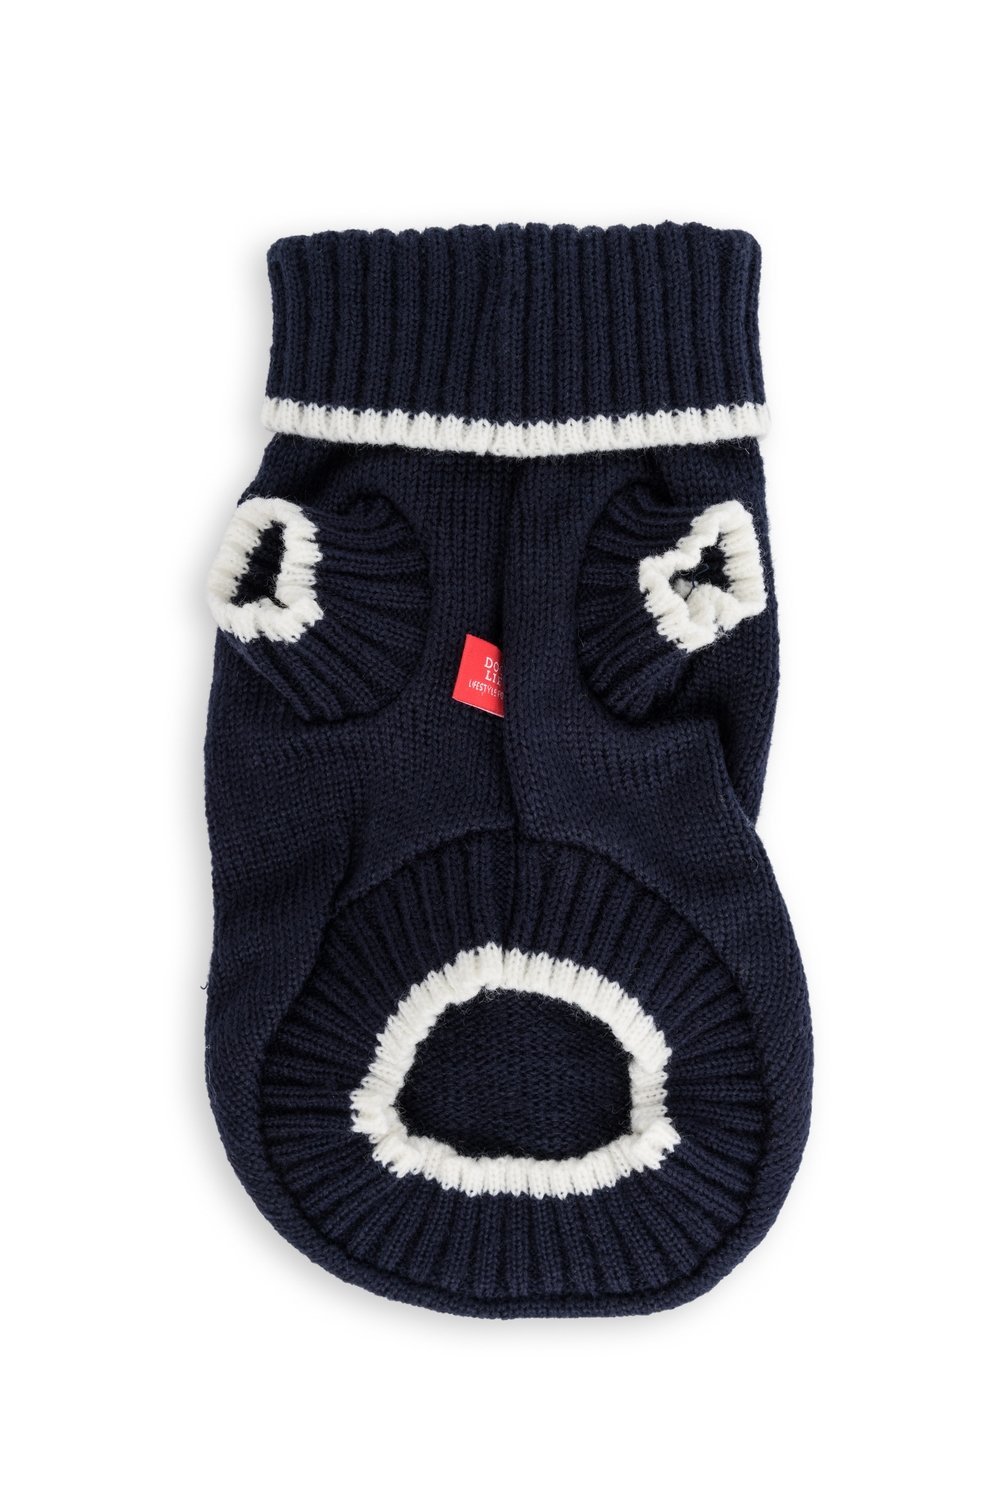 Dog's Life Mohair Knit Poloneck Navy with White Trim - Clothing